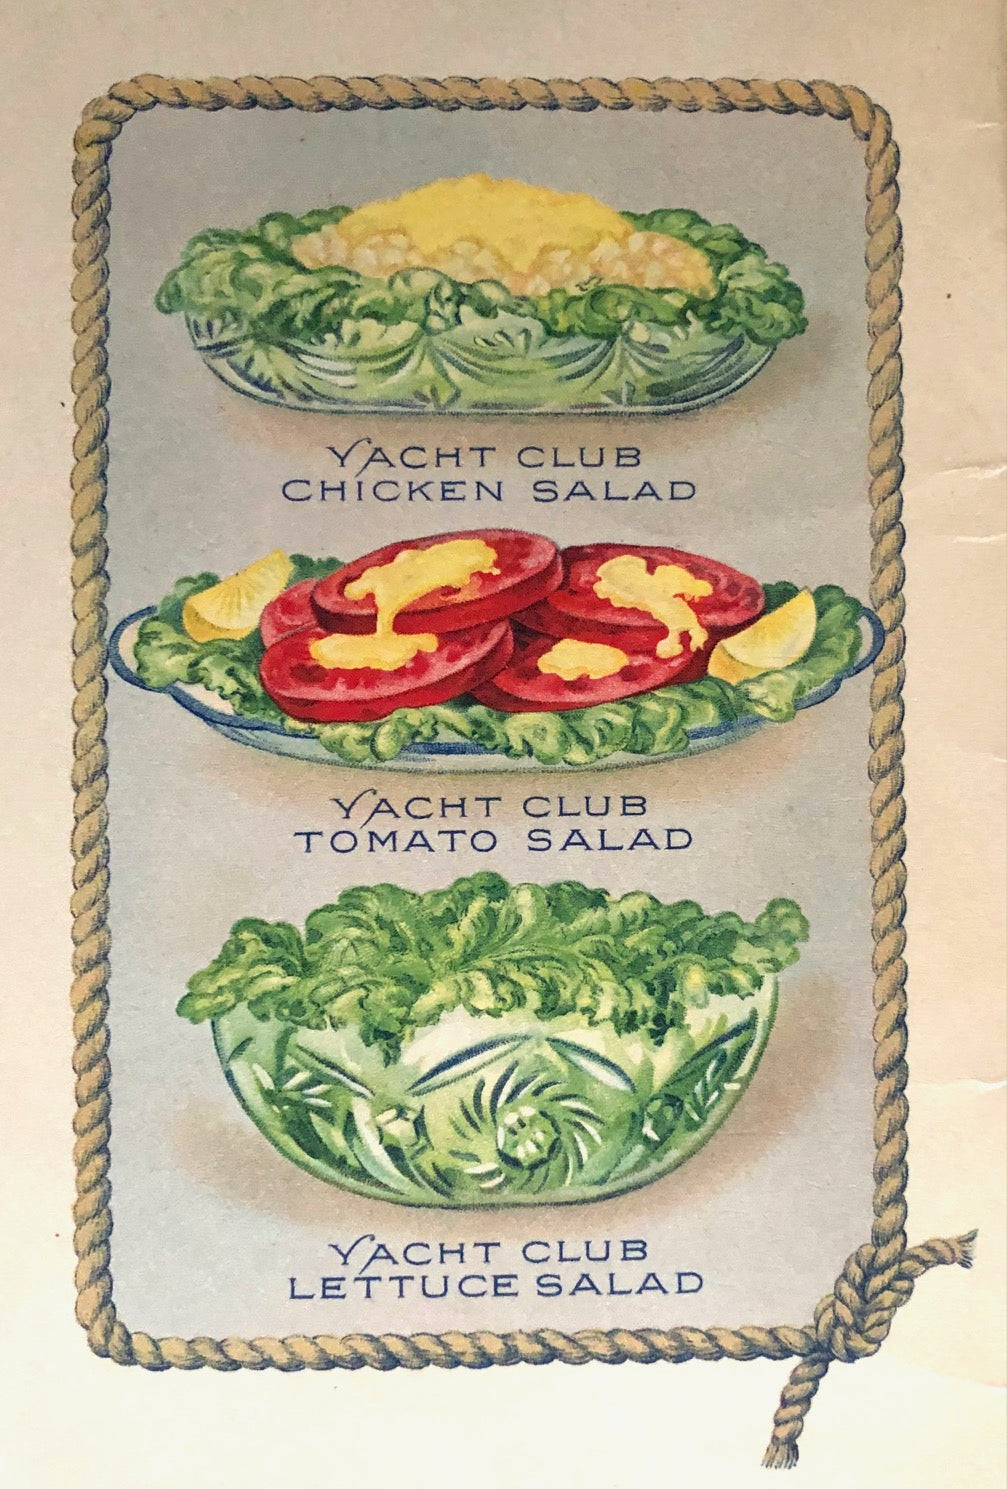 (Booklet) Yacht Club Manual of Salads: A Book of Practical Suggestions for the Use of Yacht Club Food Products